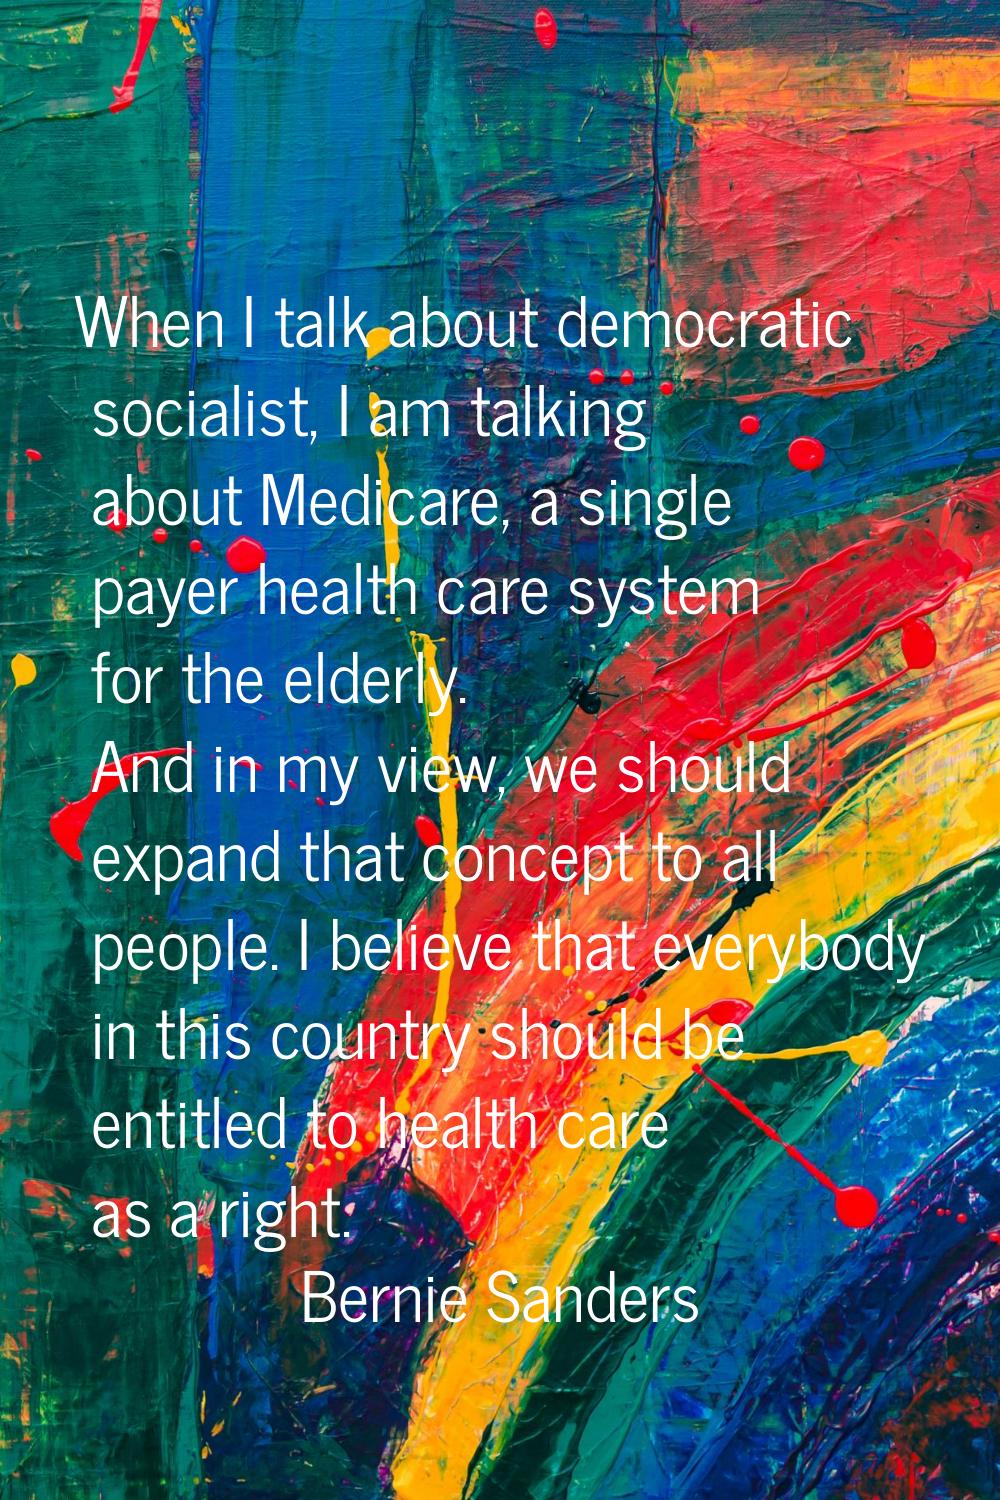 When I talk about democratic socialist, I am talking about Medicare, a single payer health care sys